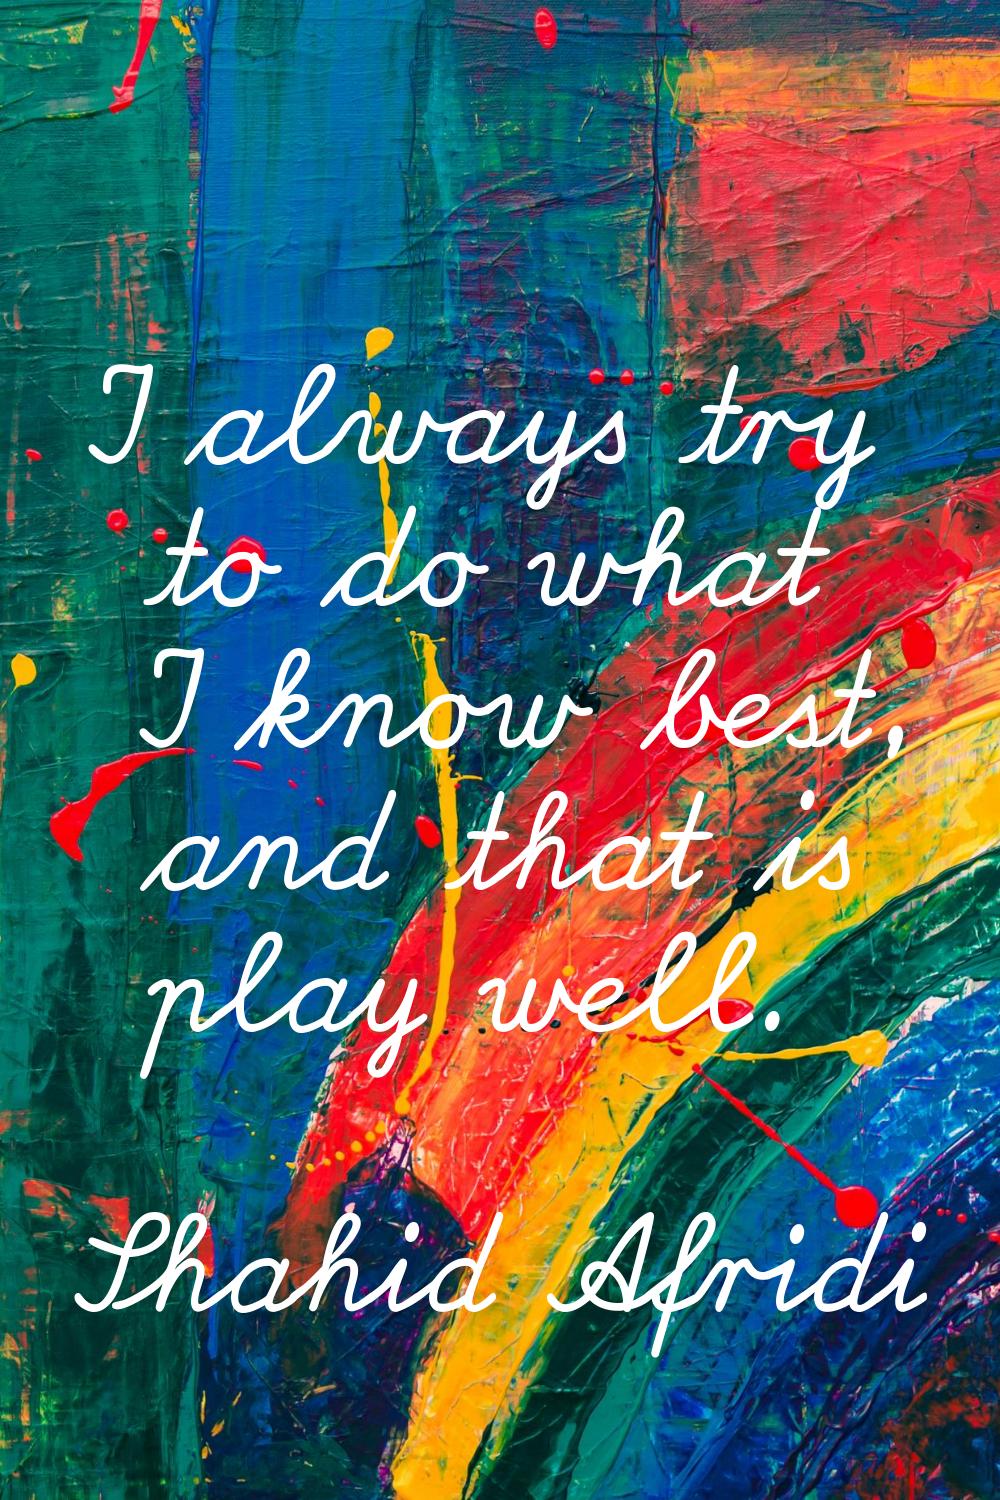 I always try to do what I know best, and that is play well.